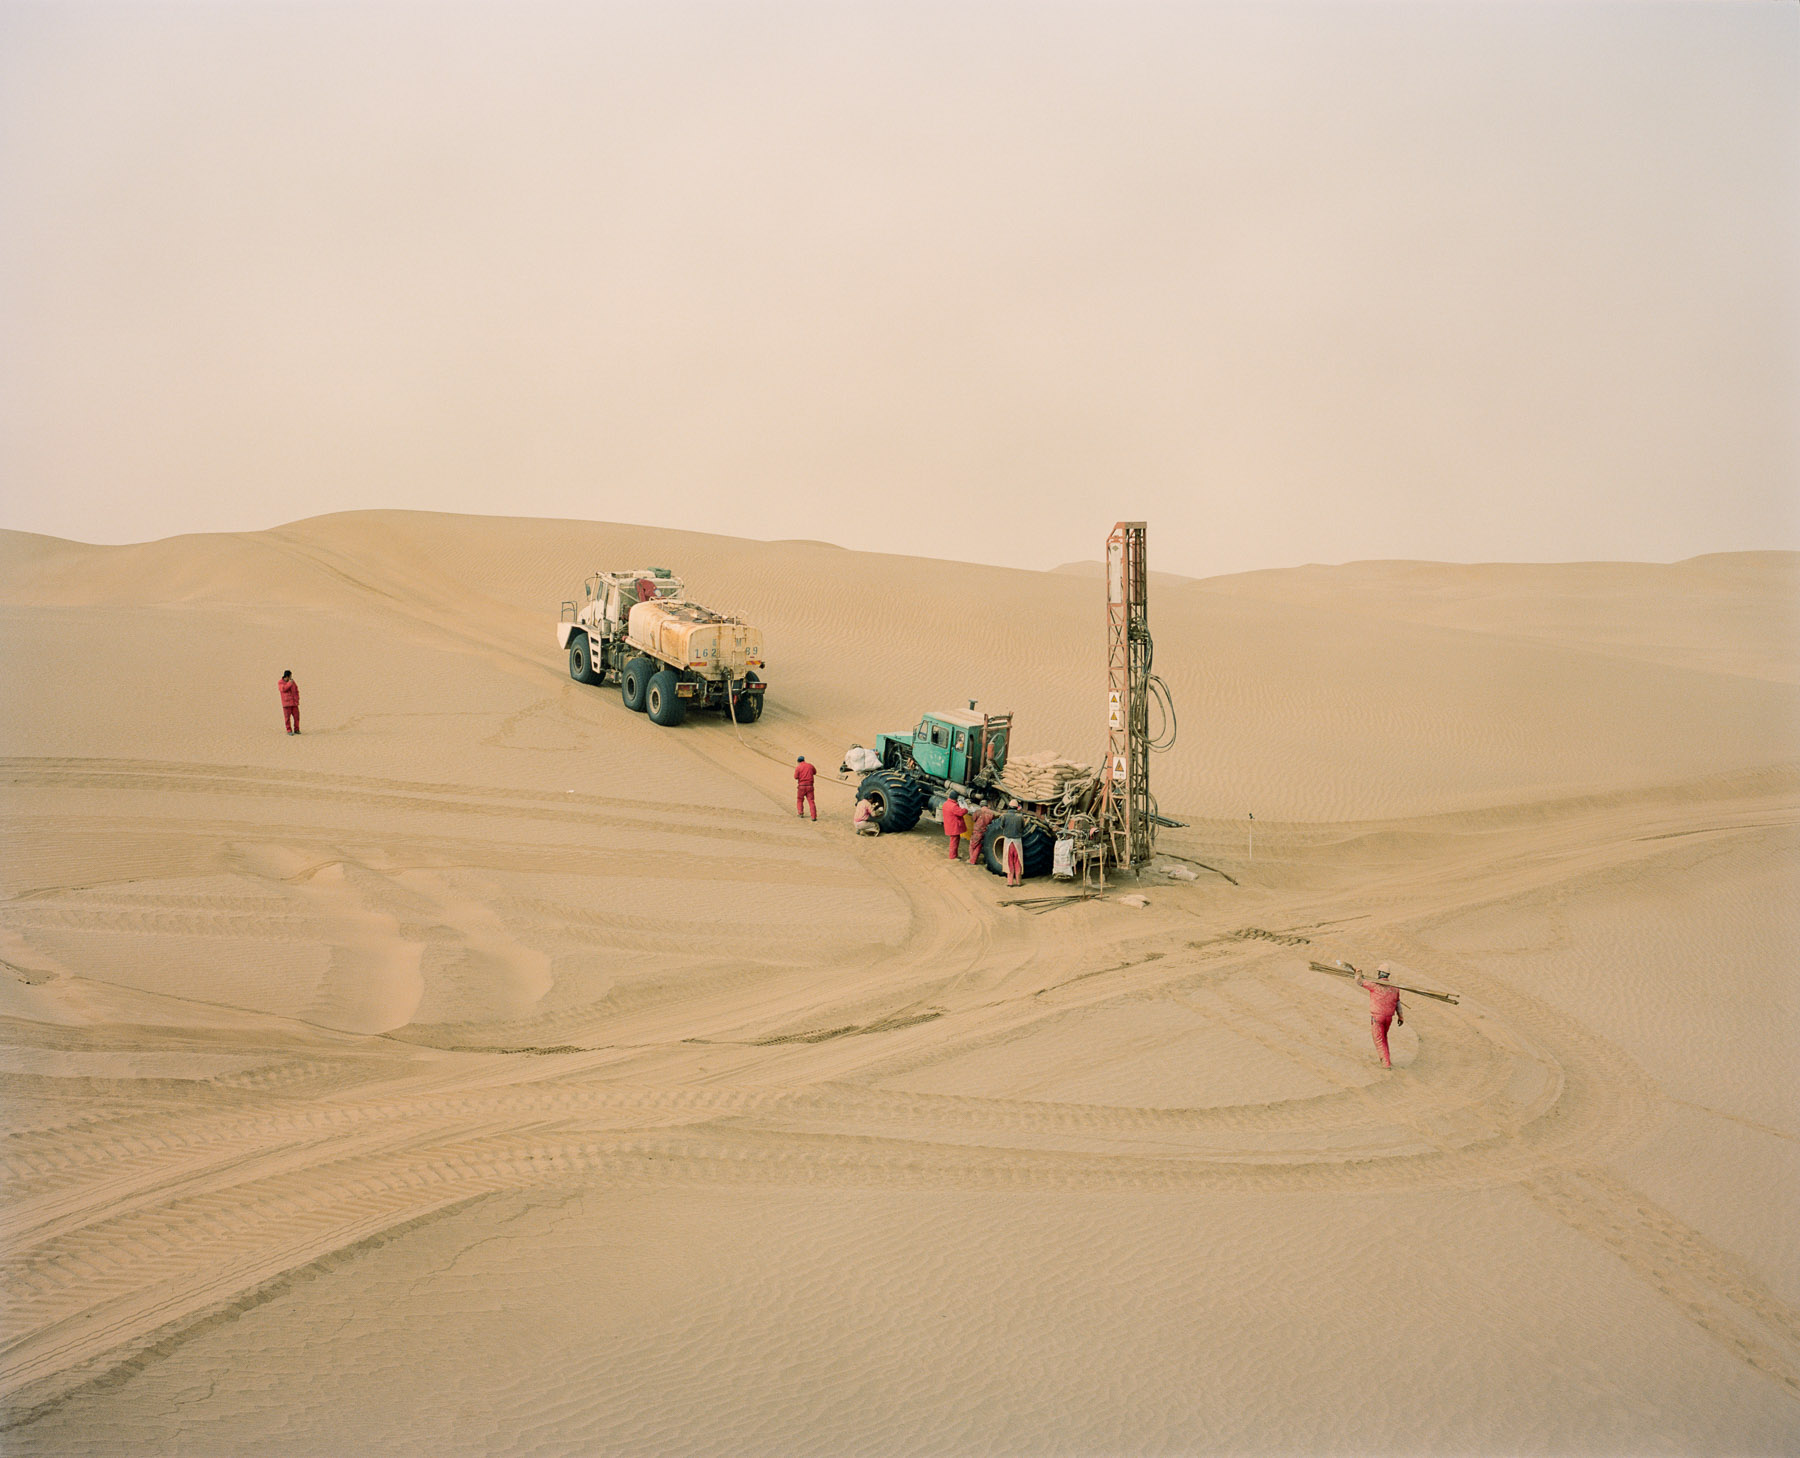  December 2016. Xinjiang province, China. Oil exploration team from CNPC - China National Petroleum Corporation - operating in the Taklamakan desert in the province of Xinjiang. This team and a few others are setting up thousands of explosive charges